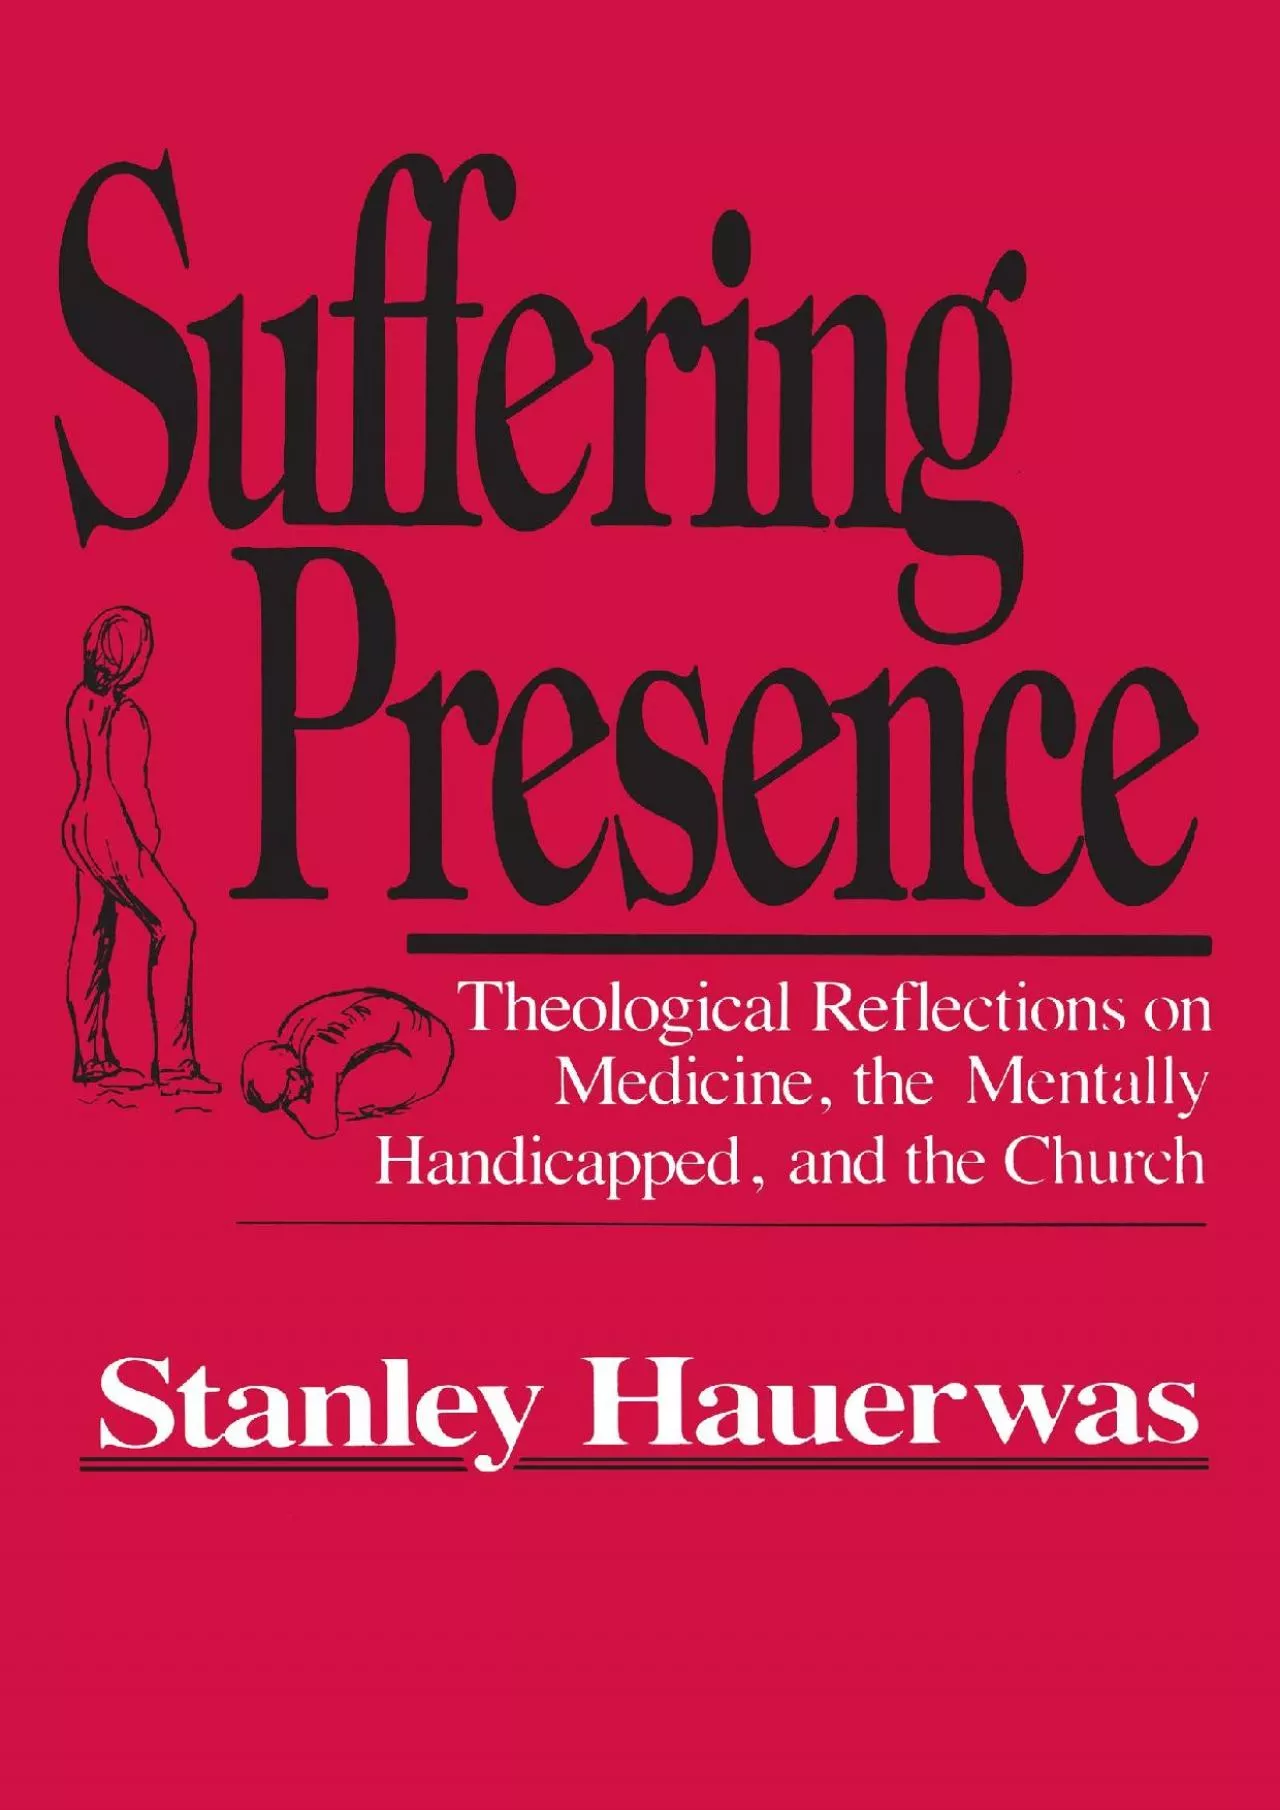 (DOWNLOAD)-Suffering Presence: Theological Reflections on Medicine, the Mentally Handicapped,